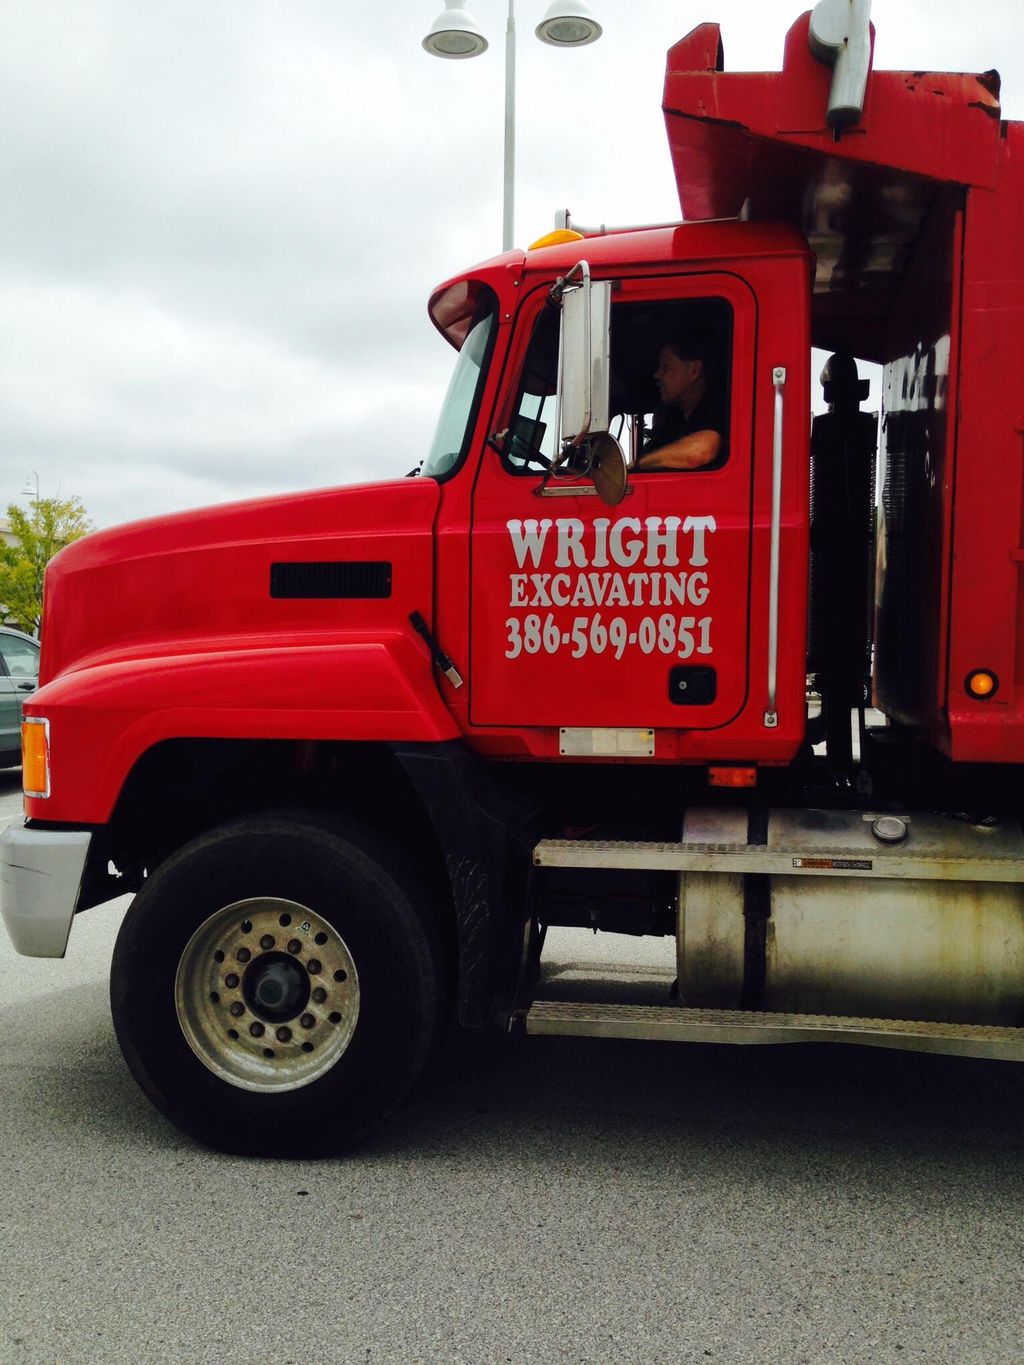 WRIGHT EXCAVATING & MORE